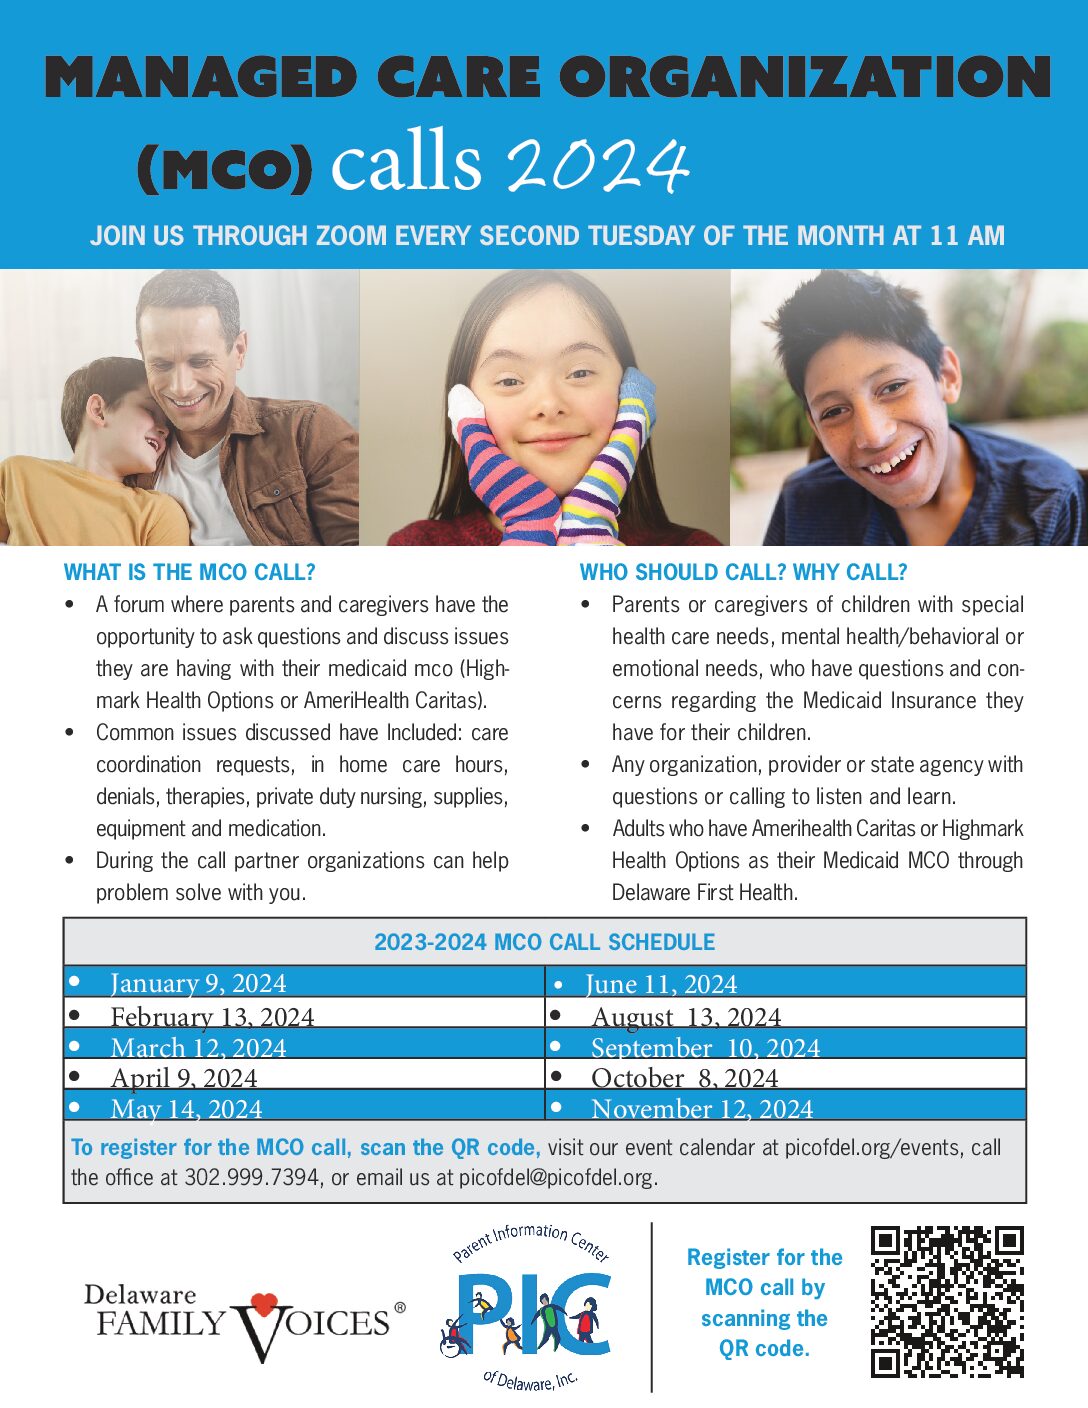 Managed Care Organization (MCO) Call